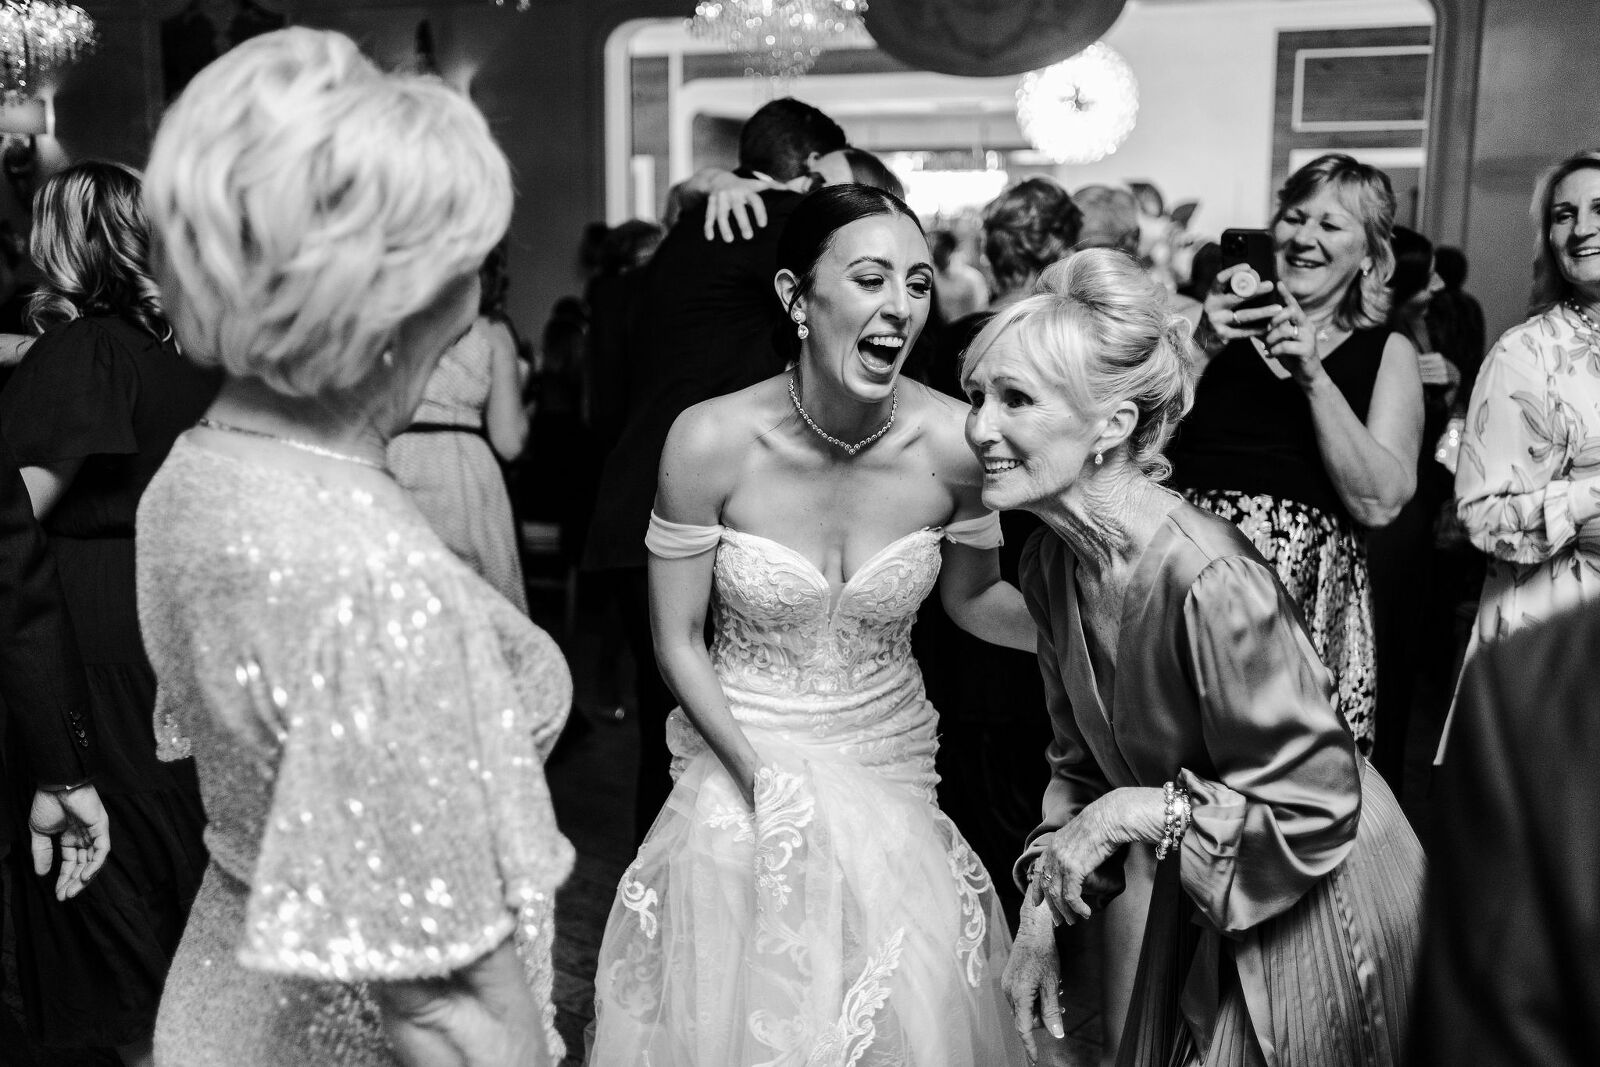 Black and white photo of the bride on the dance floor with an older guest & they are both very happy and having fun